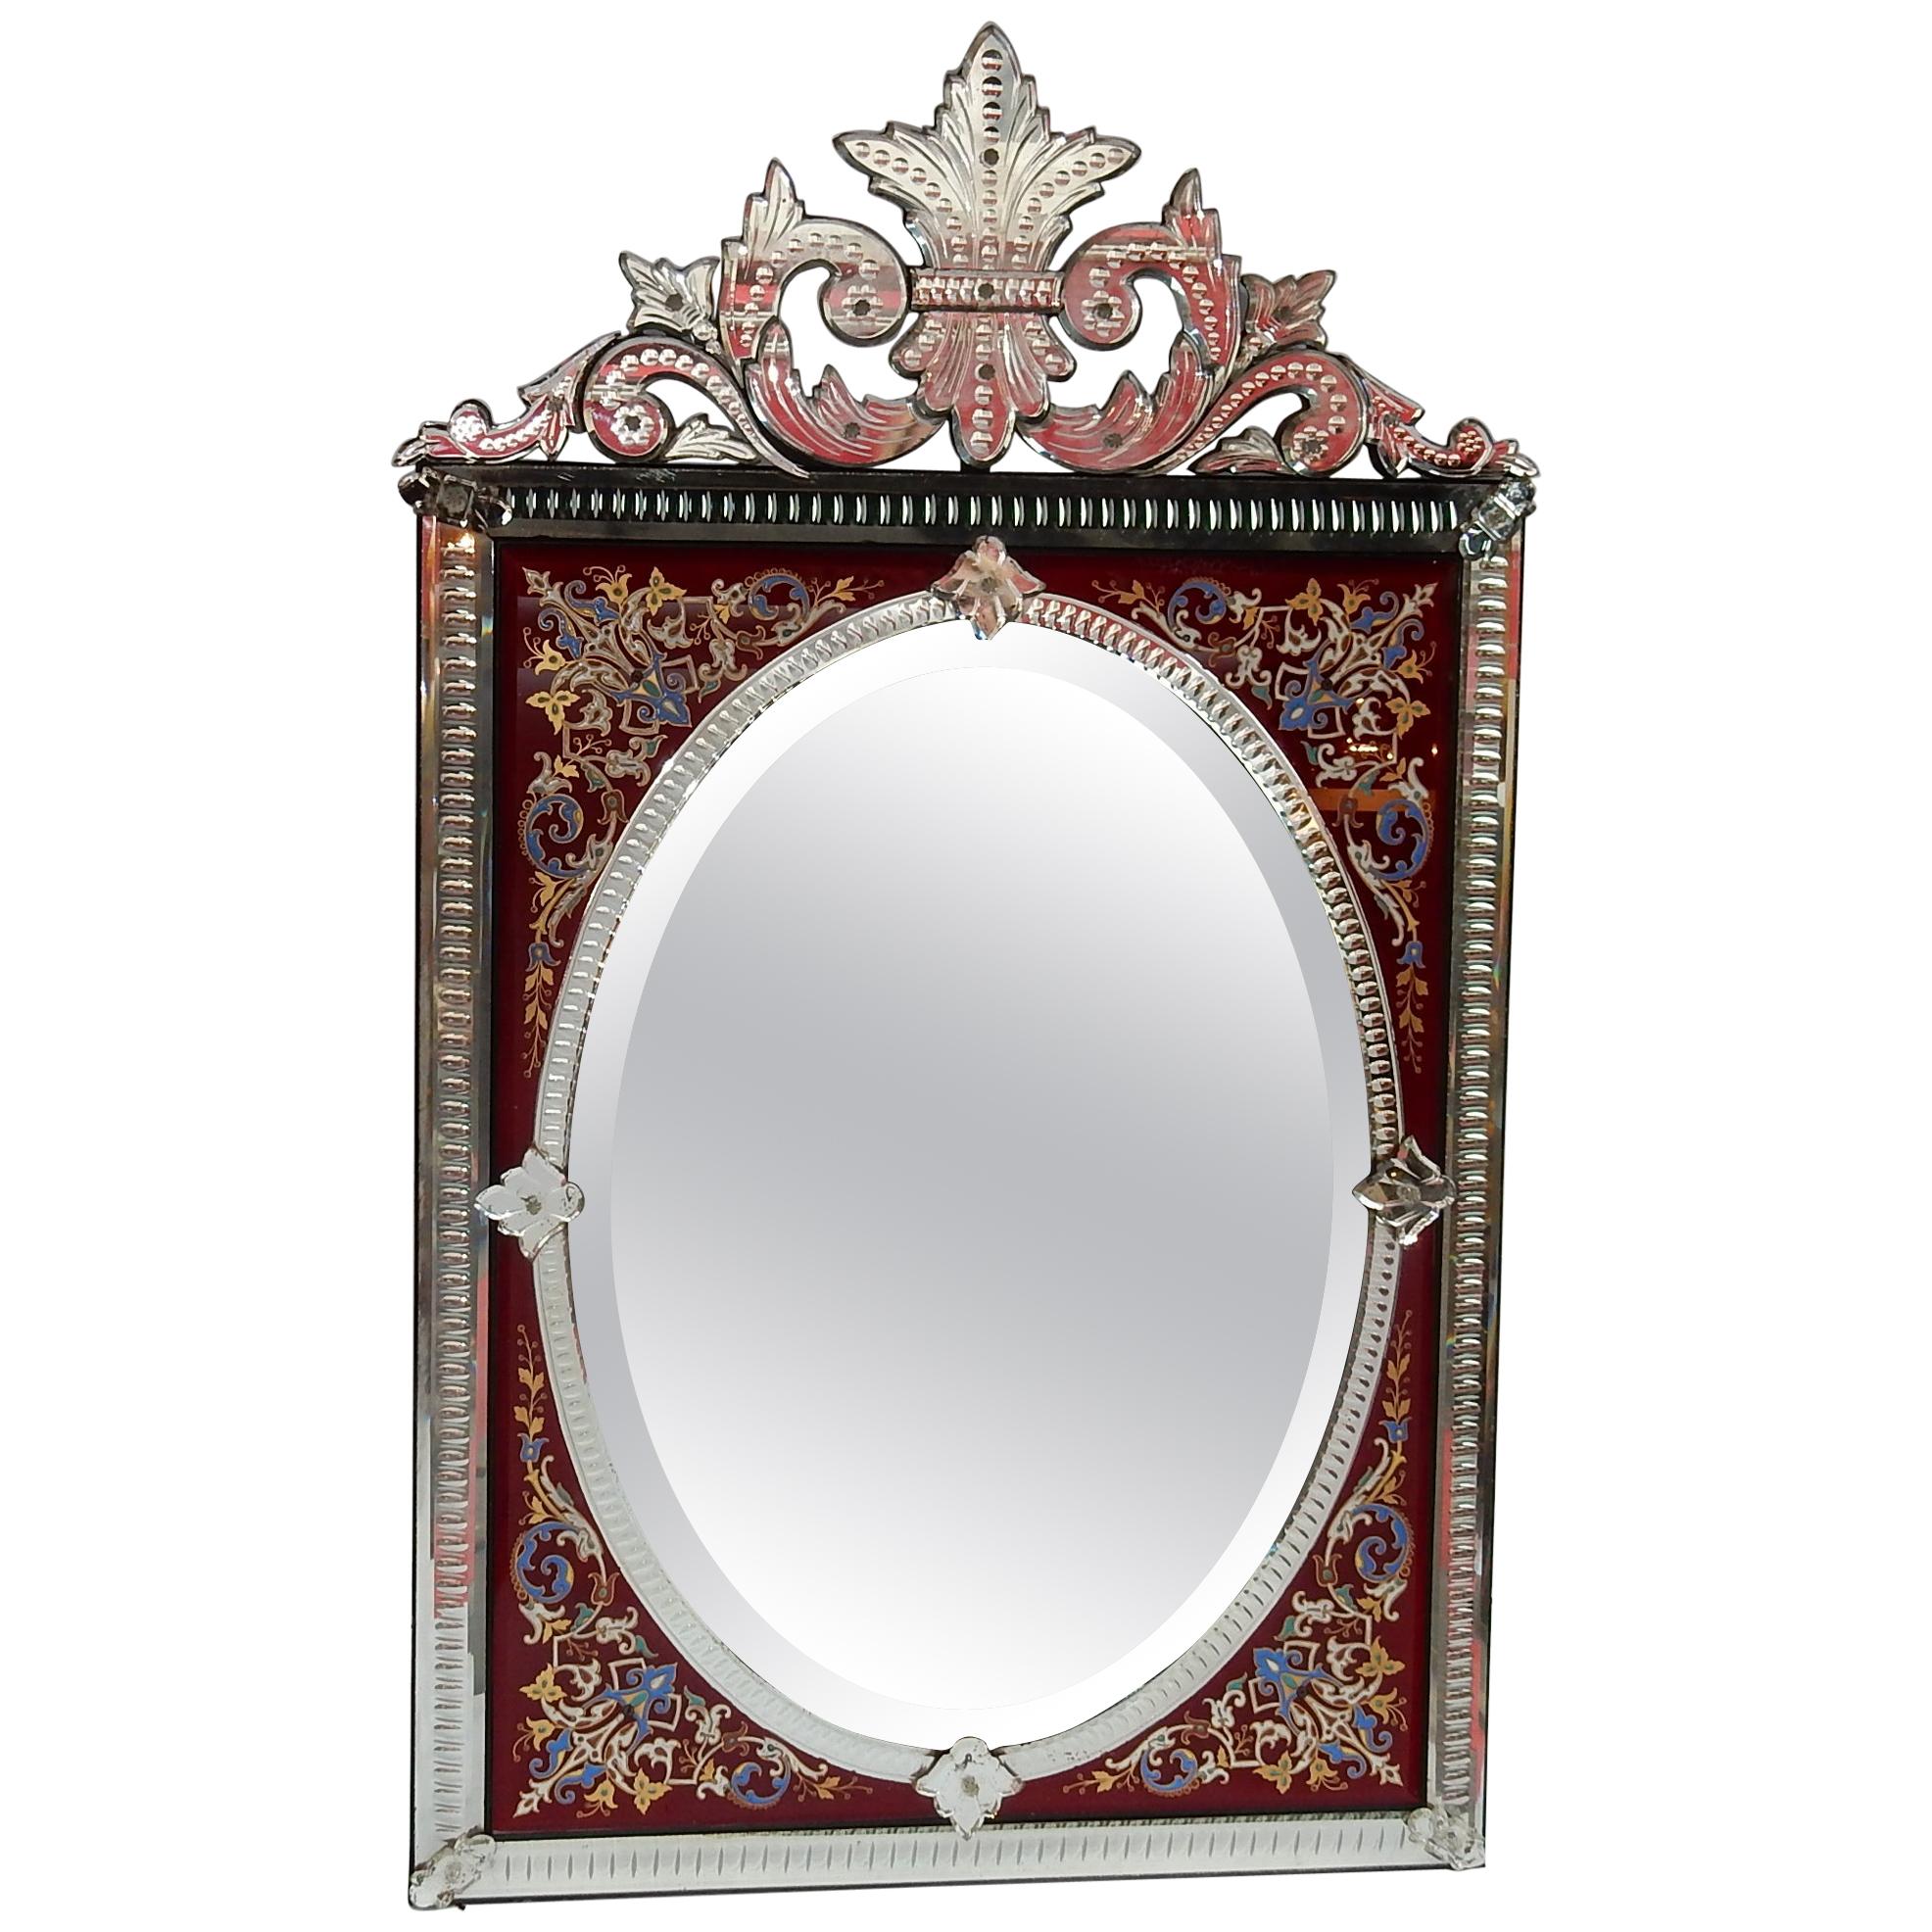 1880-1900 Venitian Mirror with Pediment - Red Color Glass Adorned with Flowers 